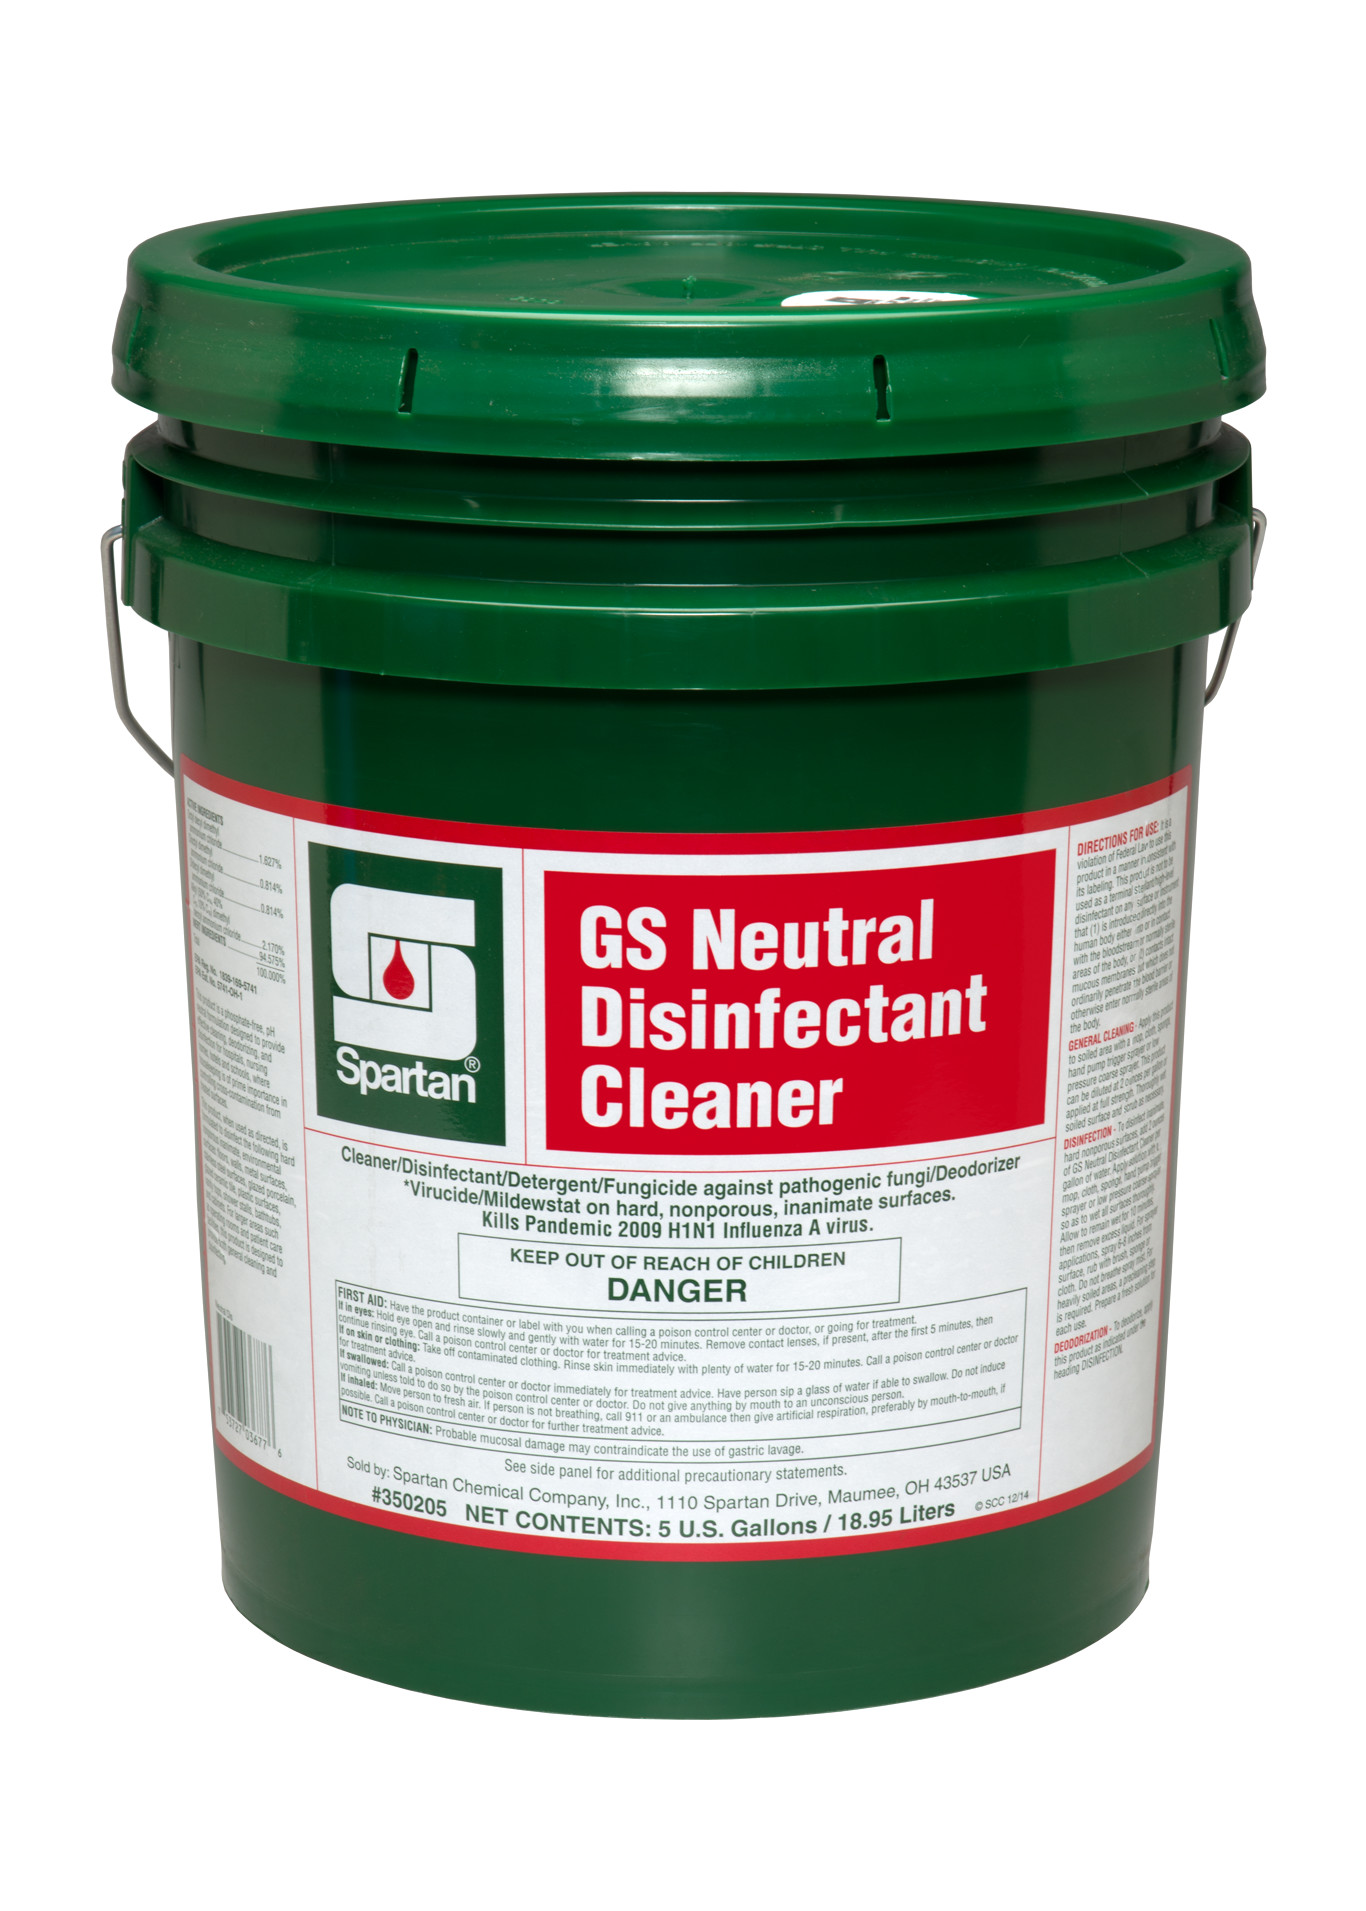 Spartan Chemical Company GS Neutral Disinfectant Cleaner, 5 GAL PAIL